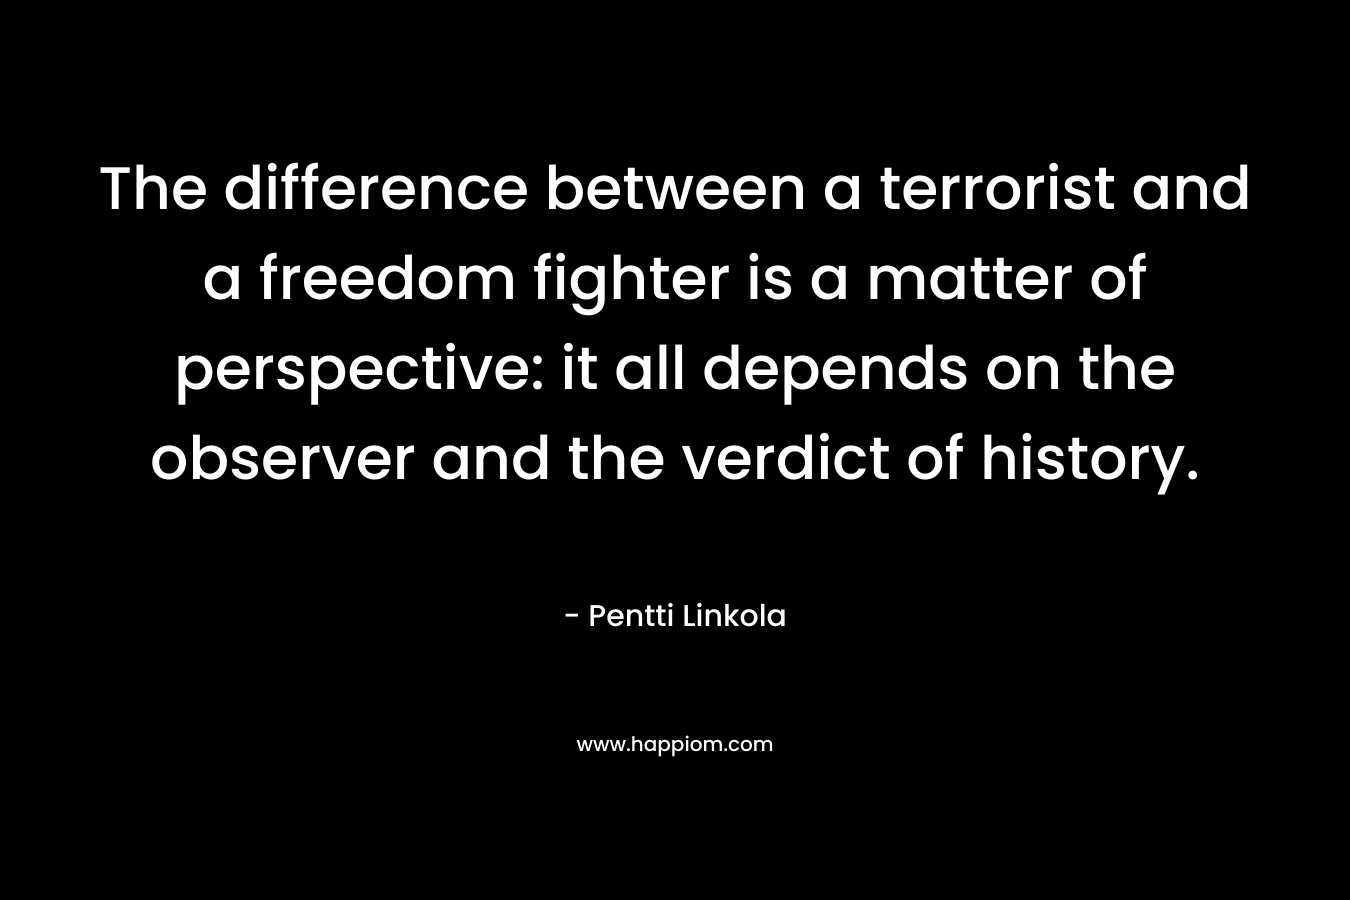 The difference between a terrorist and a freedom fighter is a matter of perspective: it all depends on the observer and the verdict of history. – Pentti Linkola